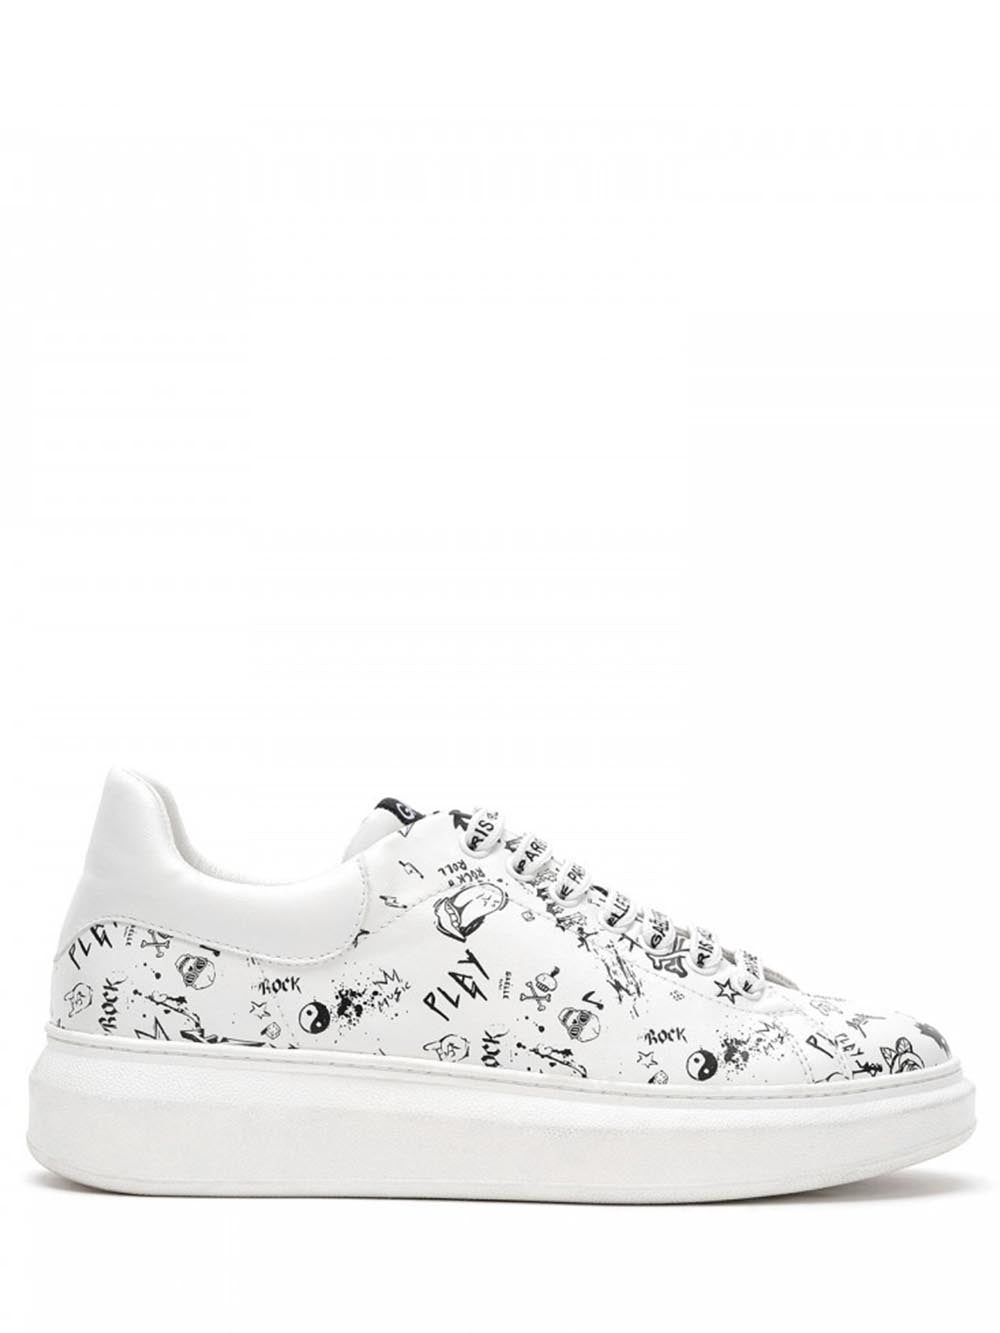 GAELLE Sneakers Donna Bianco